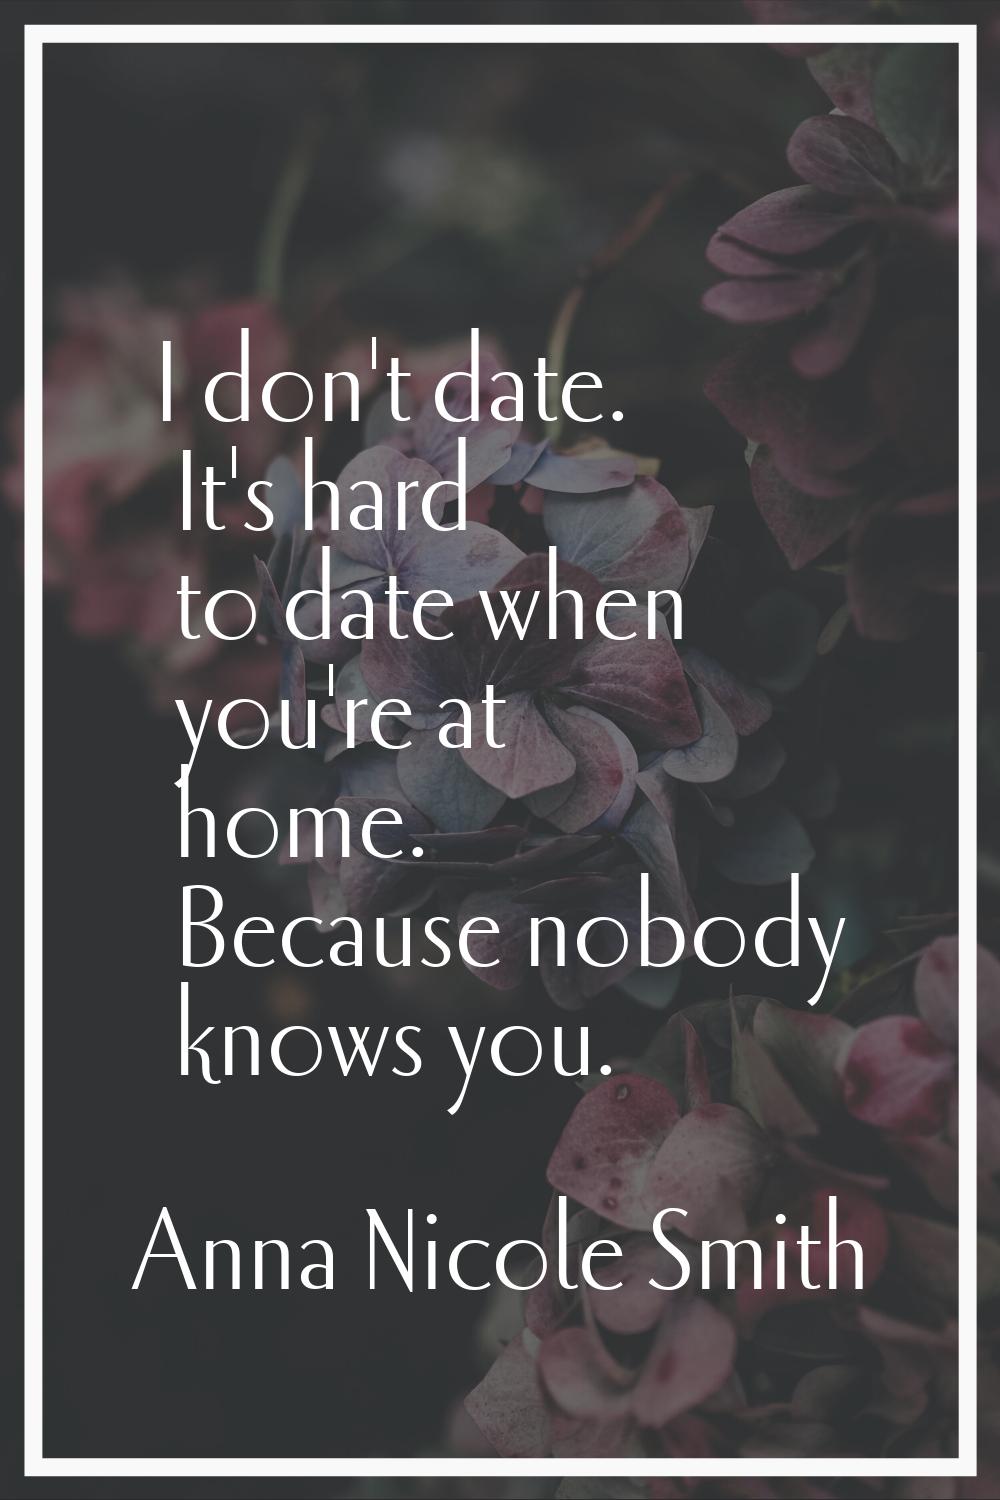 I don't date. It's hard to date when you're at home. Because nobody knows you.